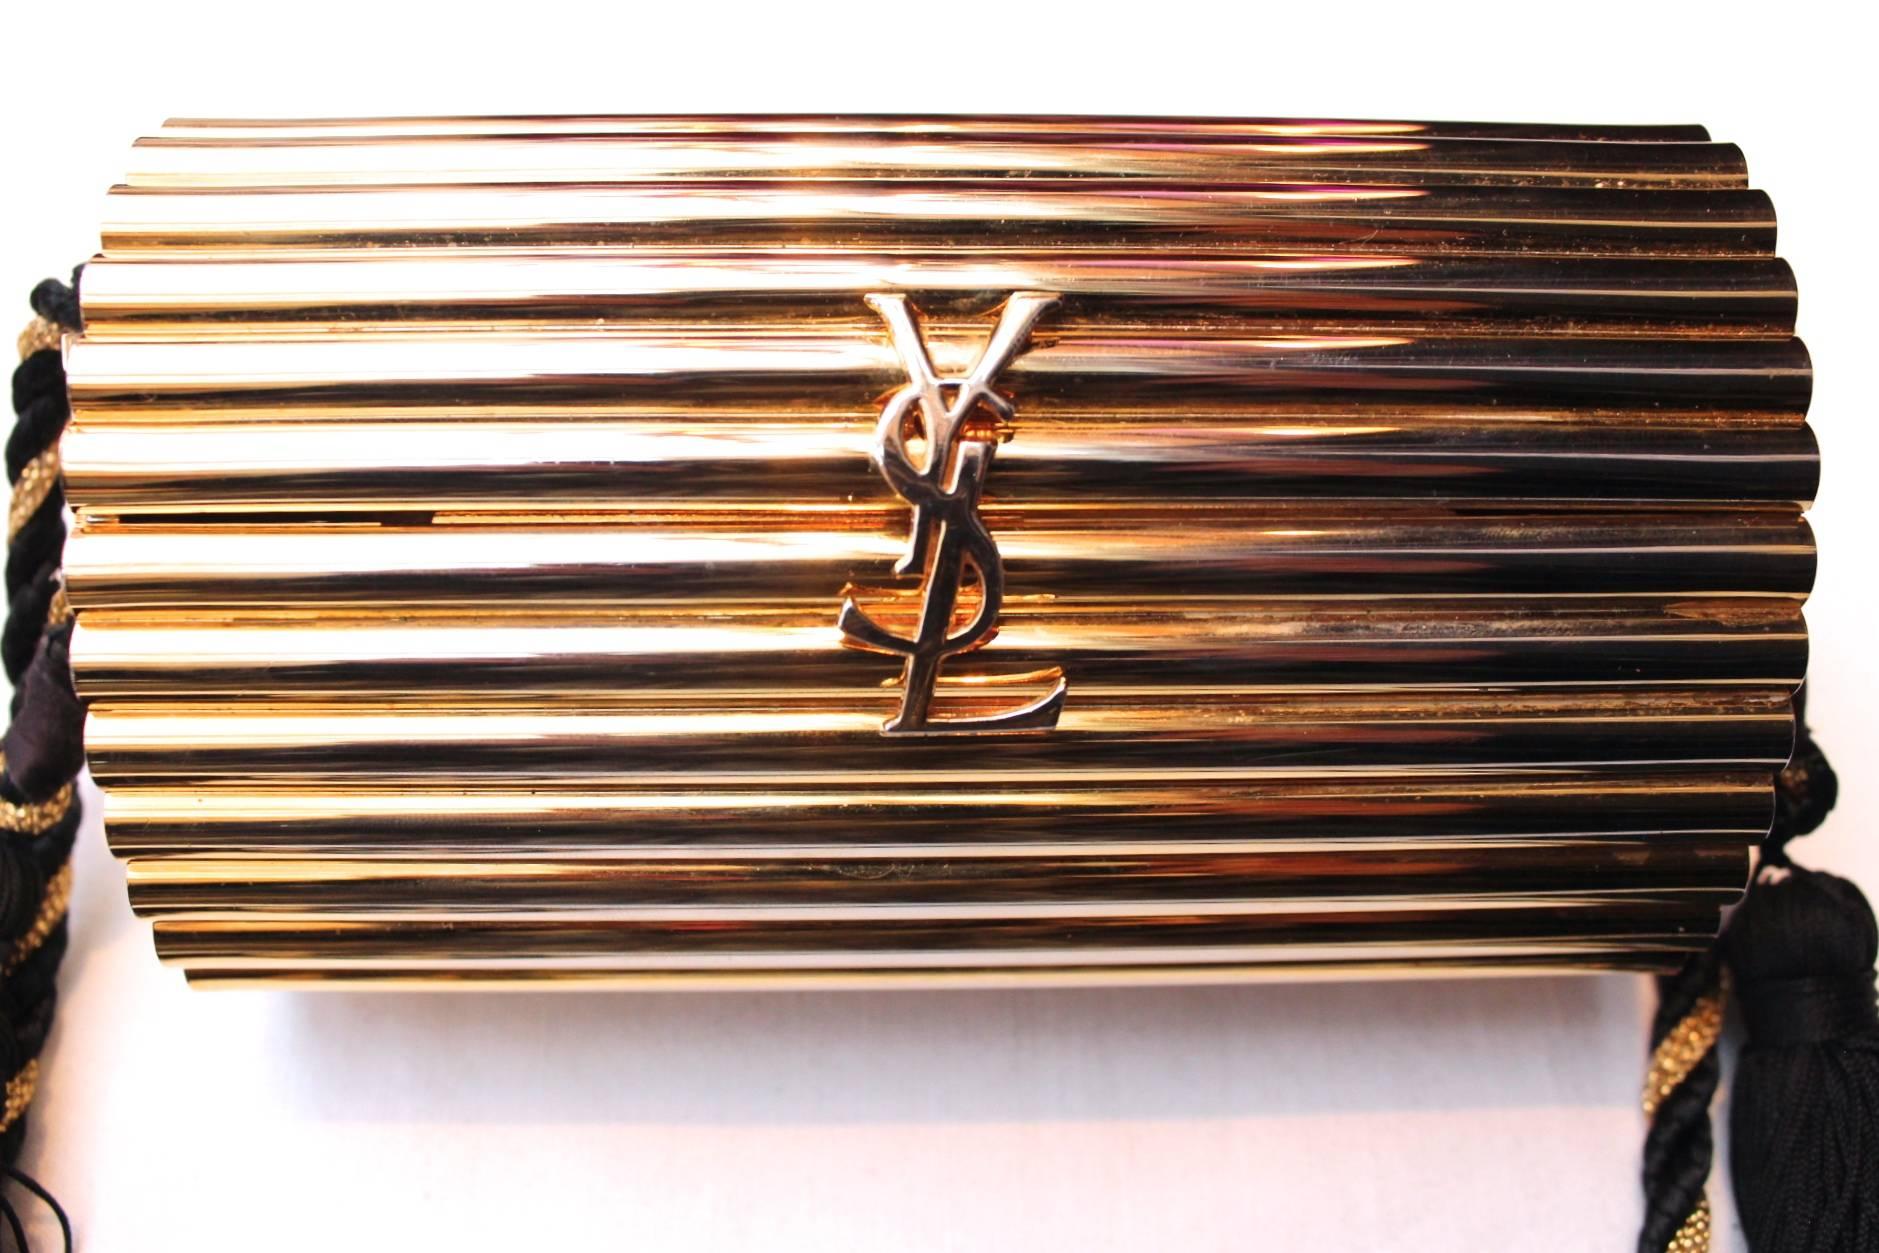 YVES SAINT LAURENT Gilt metal evening clutch featuring a chiseled and ribbed textured oval box, a large logo front detail, a black and gold braided shoulder strap and two black passementerie tassels. The purse is lined in gold leather

A must have